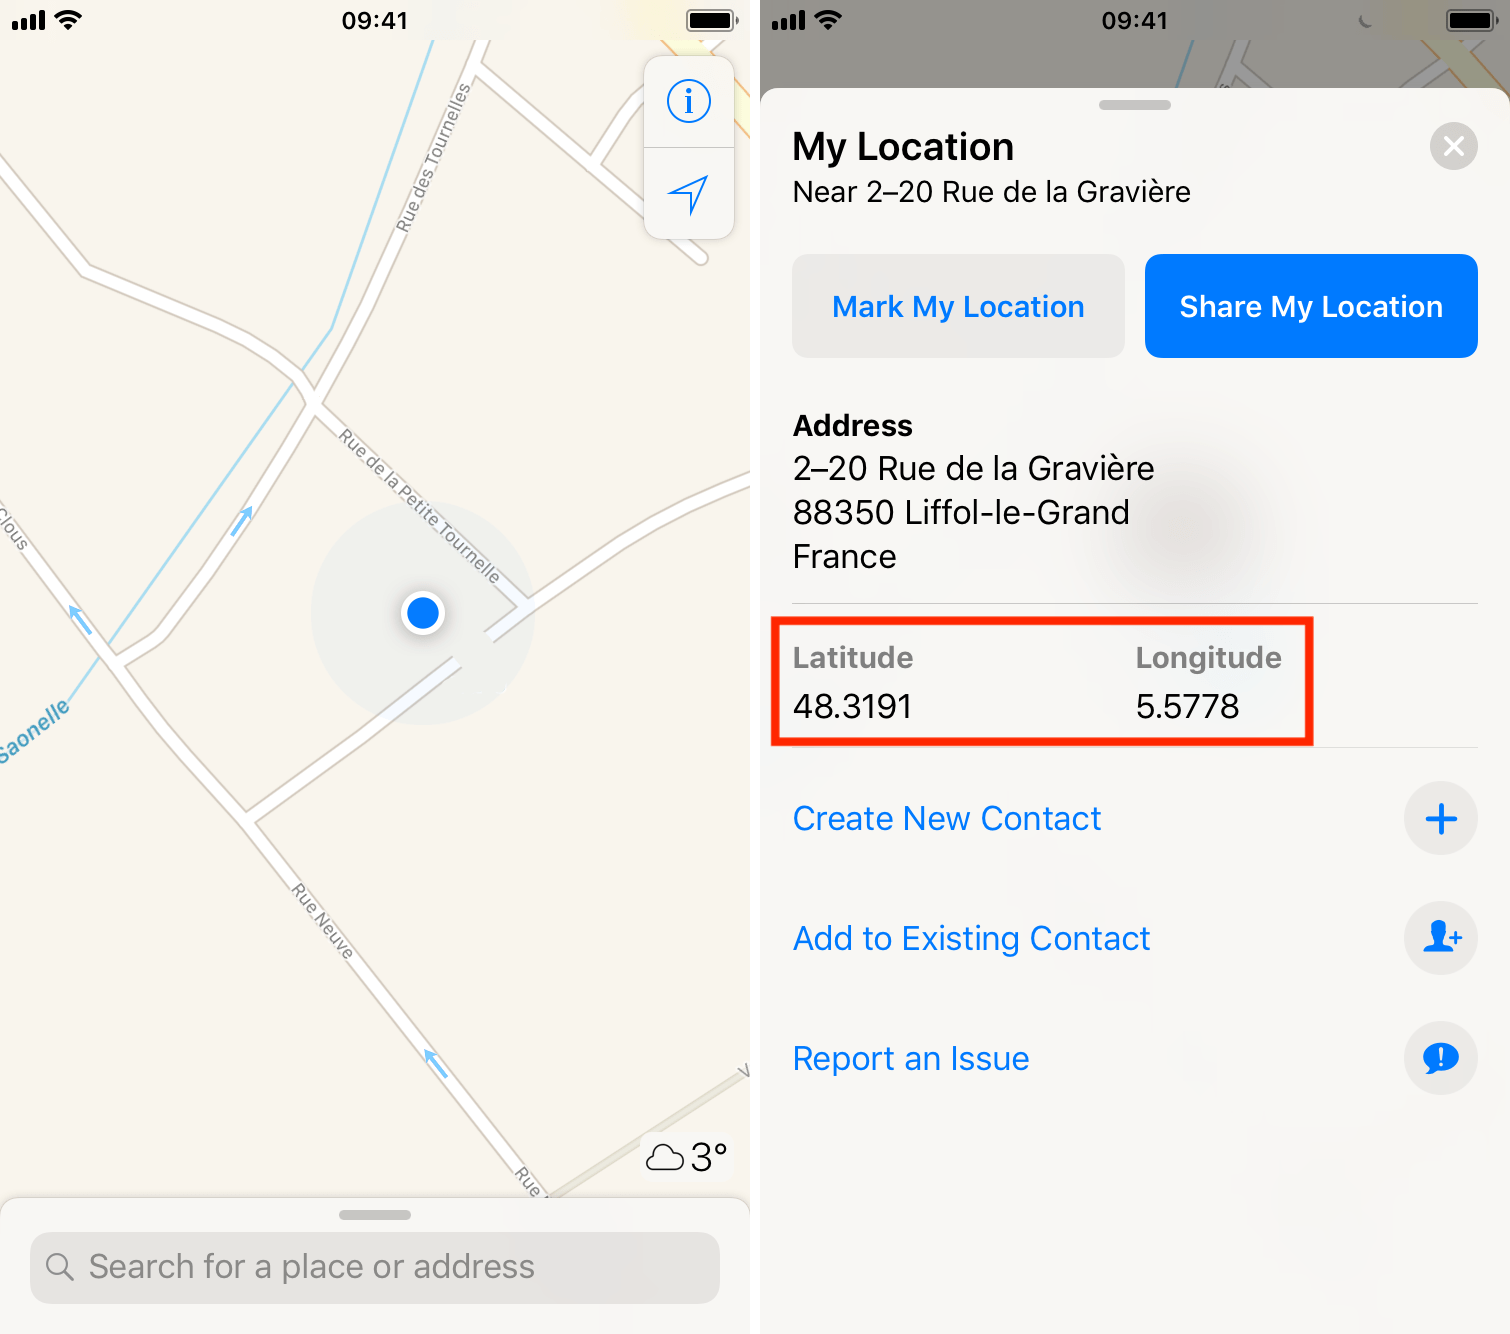 Can you get GPS coordinates from an address?